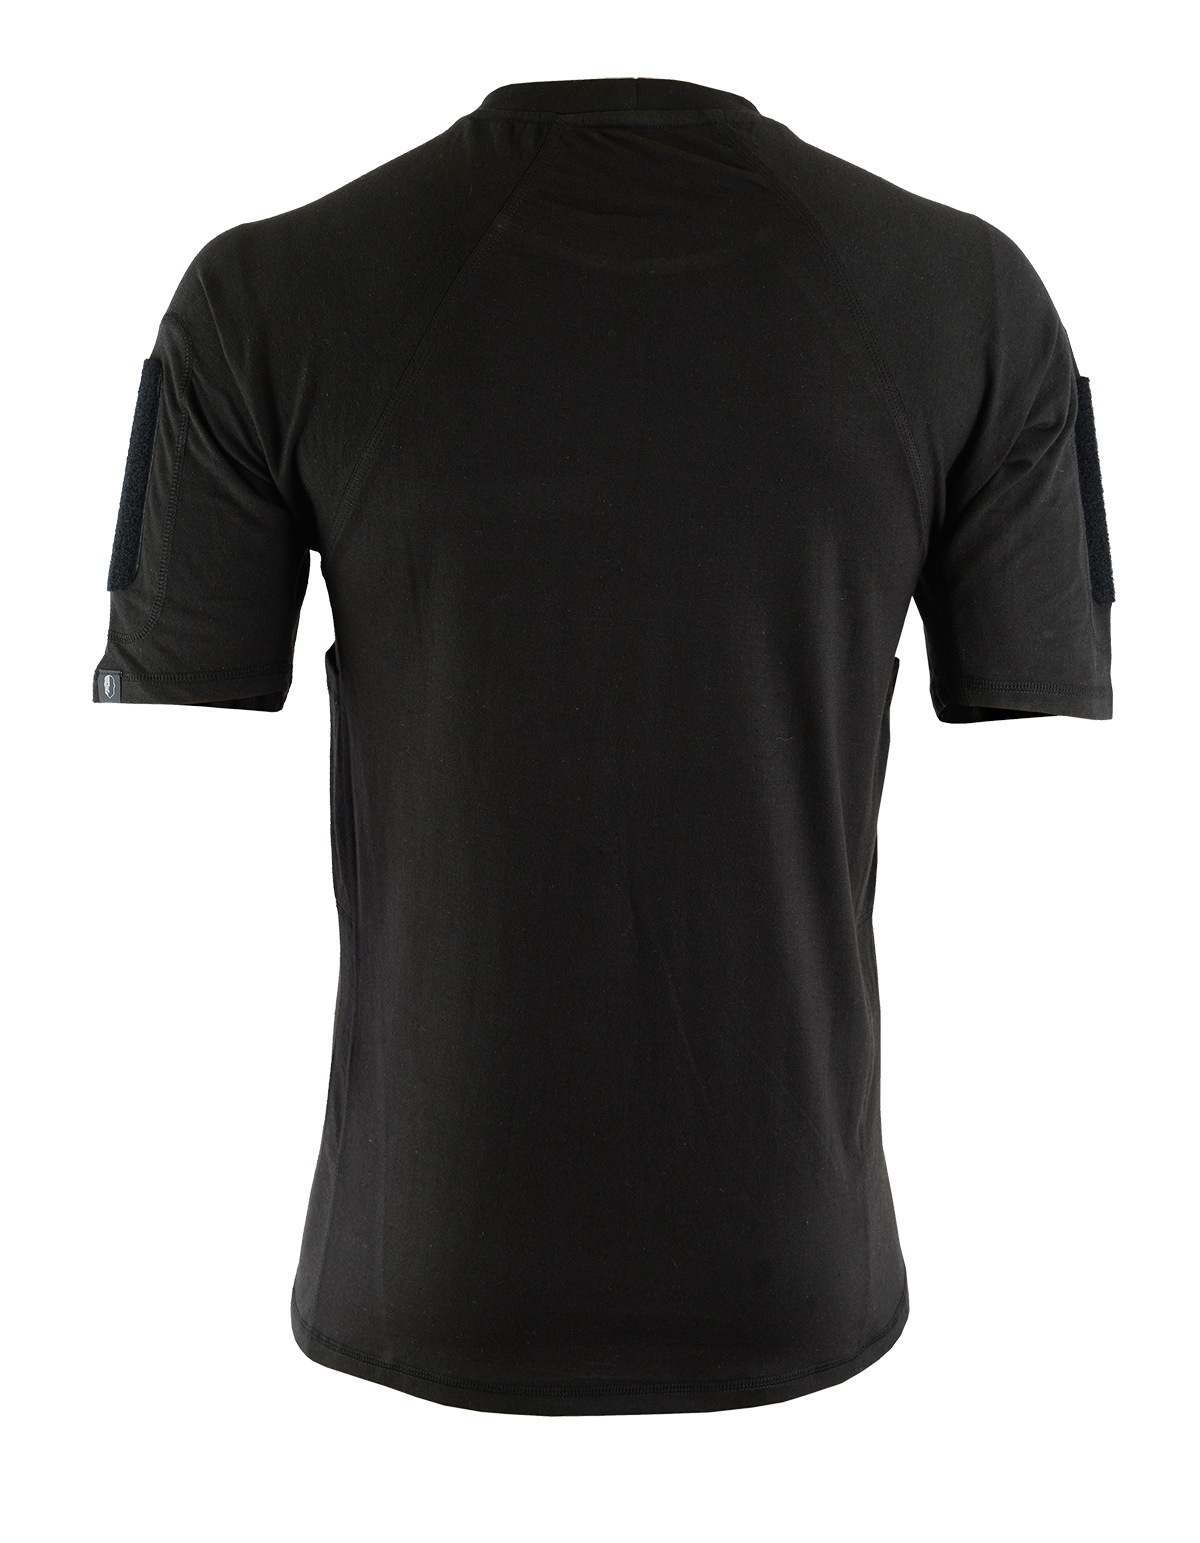 Tactical Zone instructor shirt in black Camo back